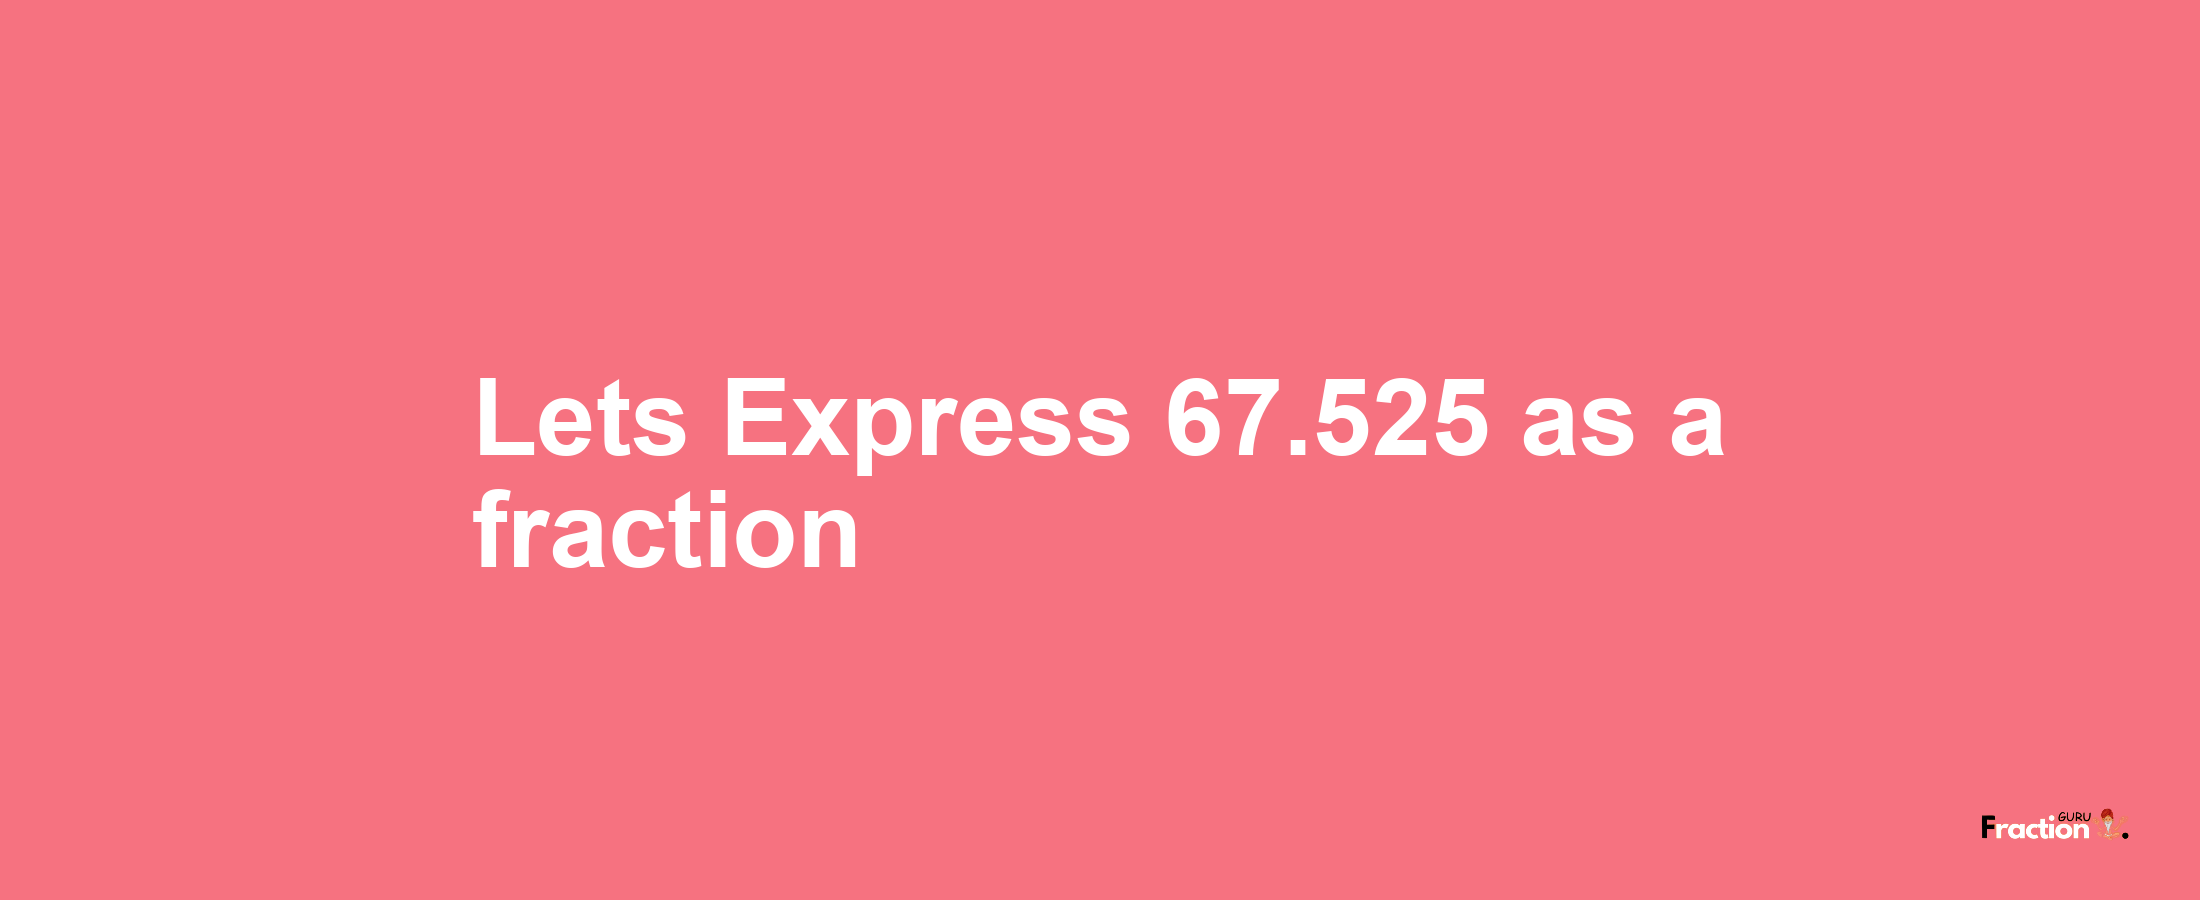 Lets Express 67.525 as afraction